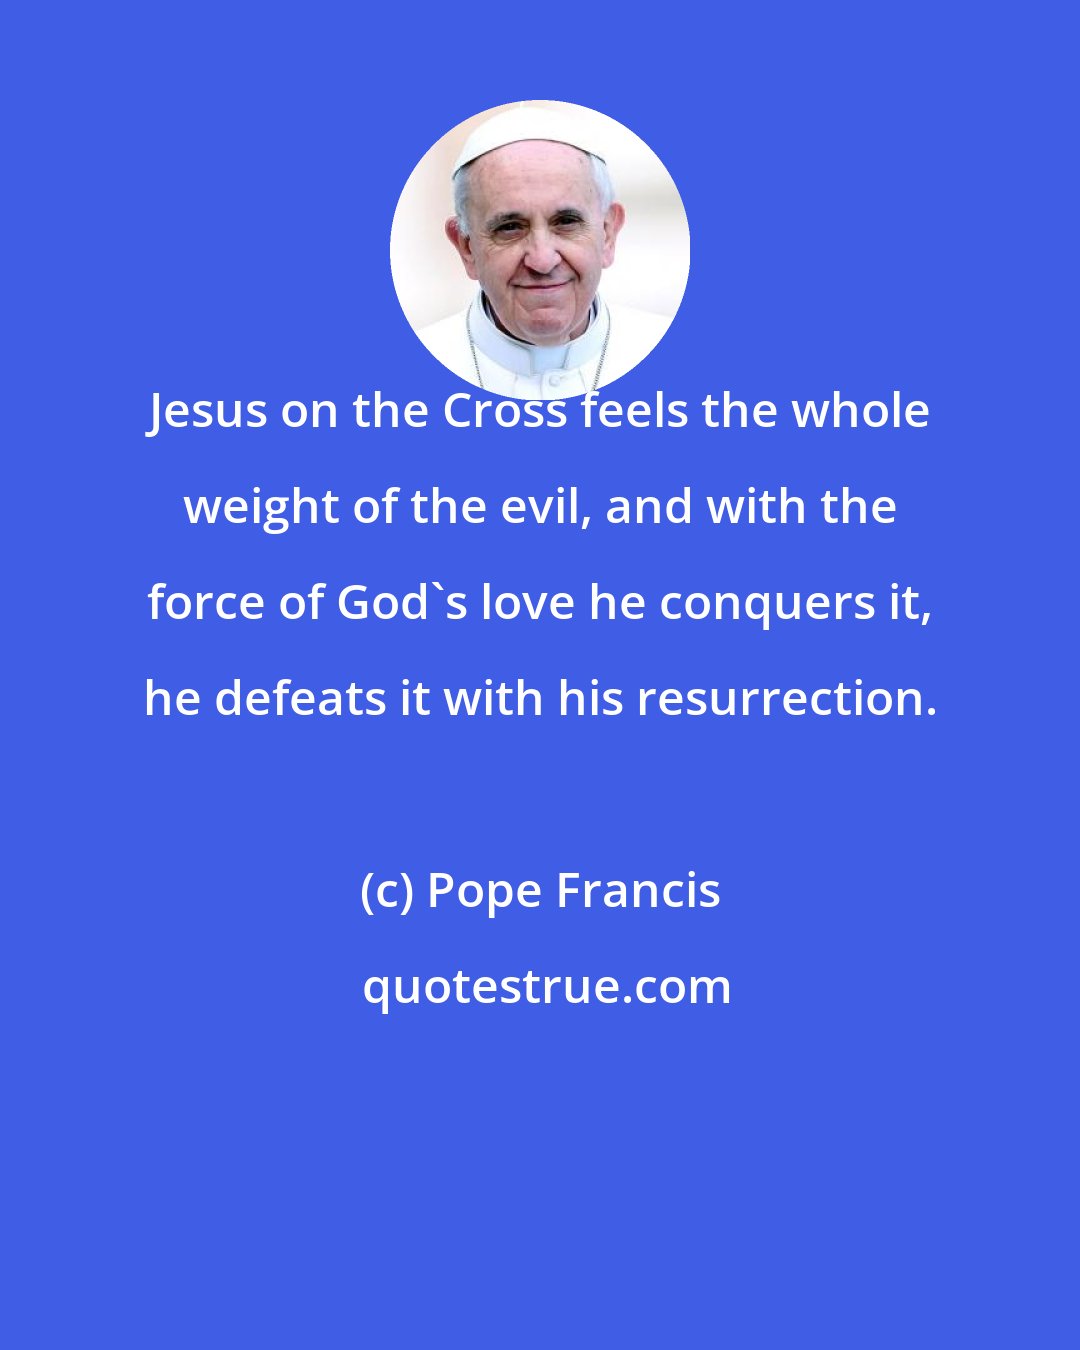 Pope Francis: Jesus on the Cross feels the whole weight of the evil, and with the force of God's love he conquers it, he defeats it with his resurrection.